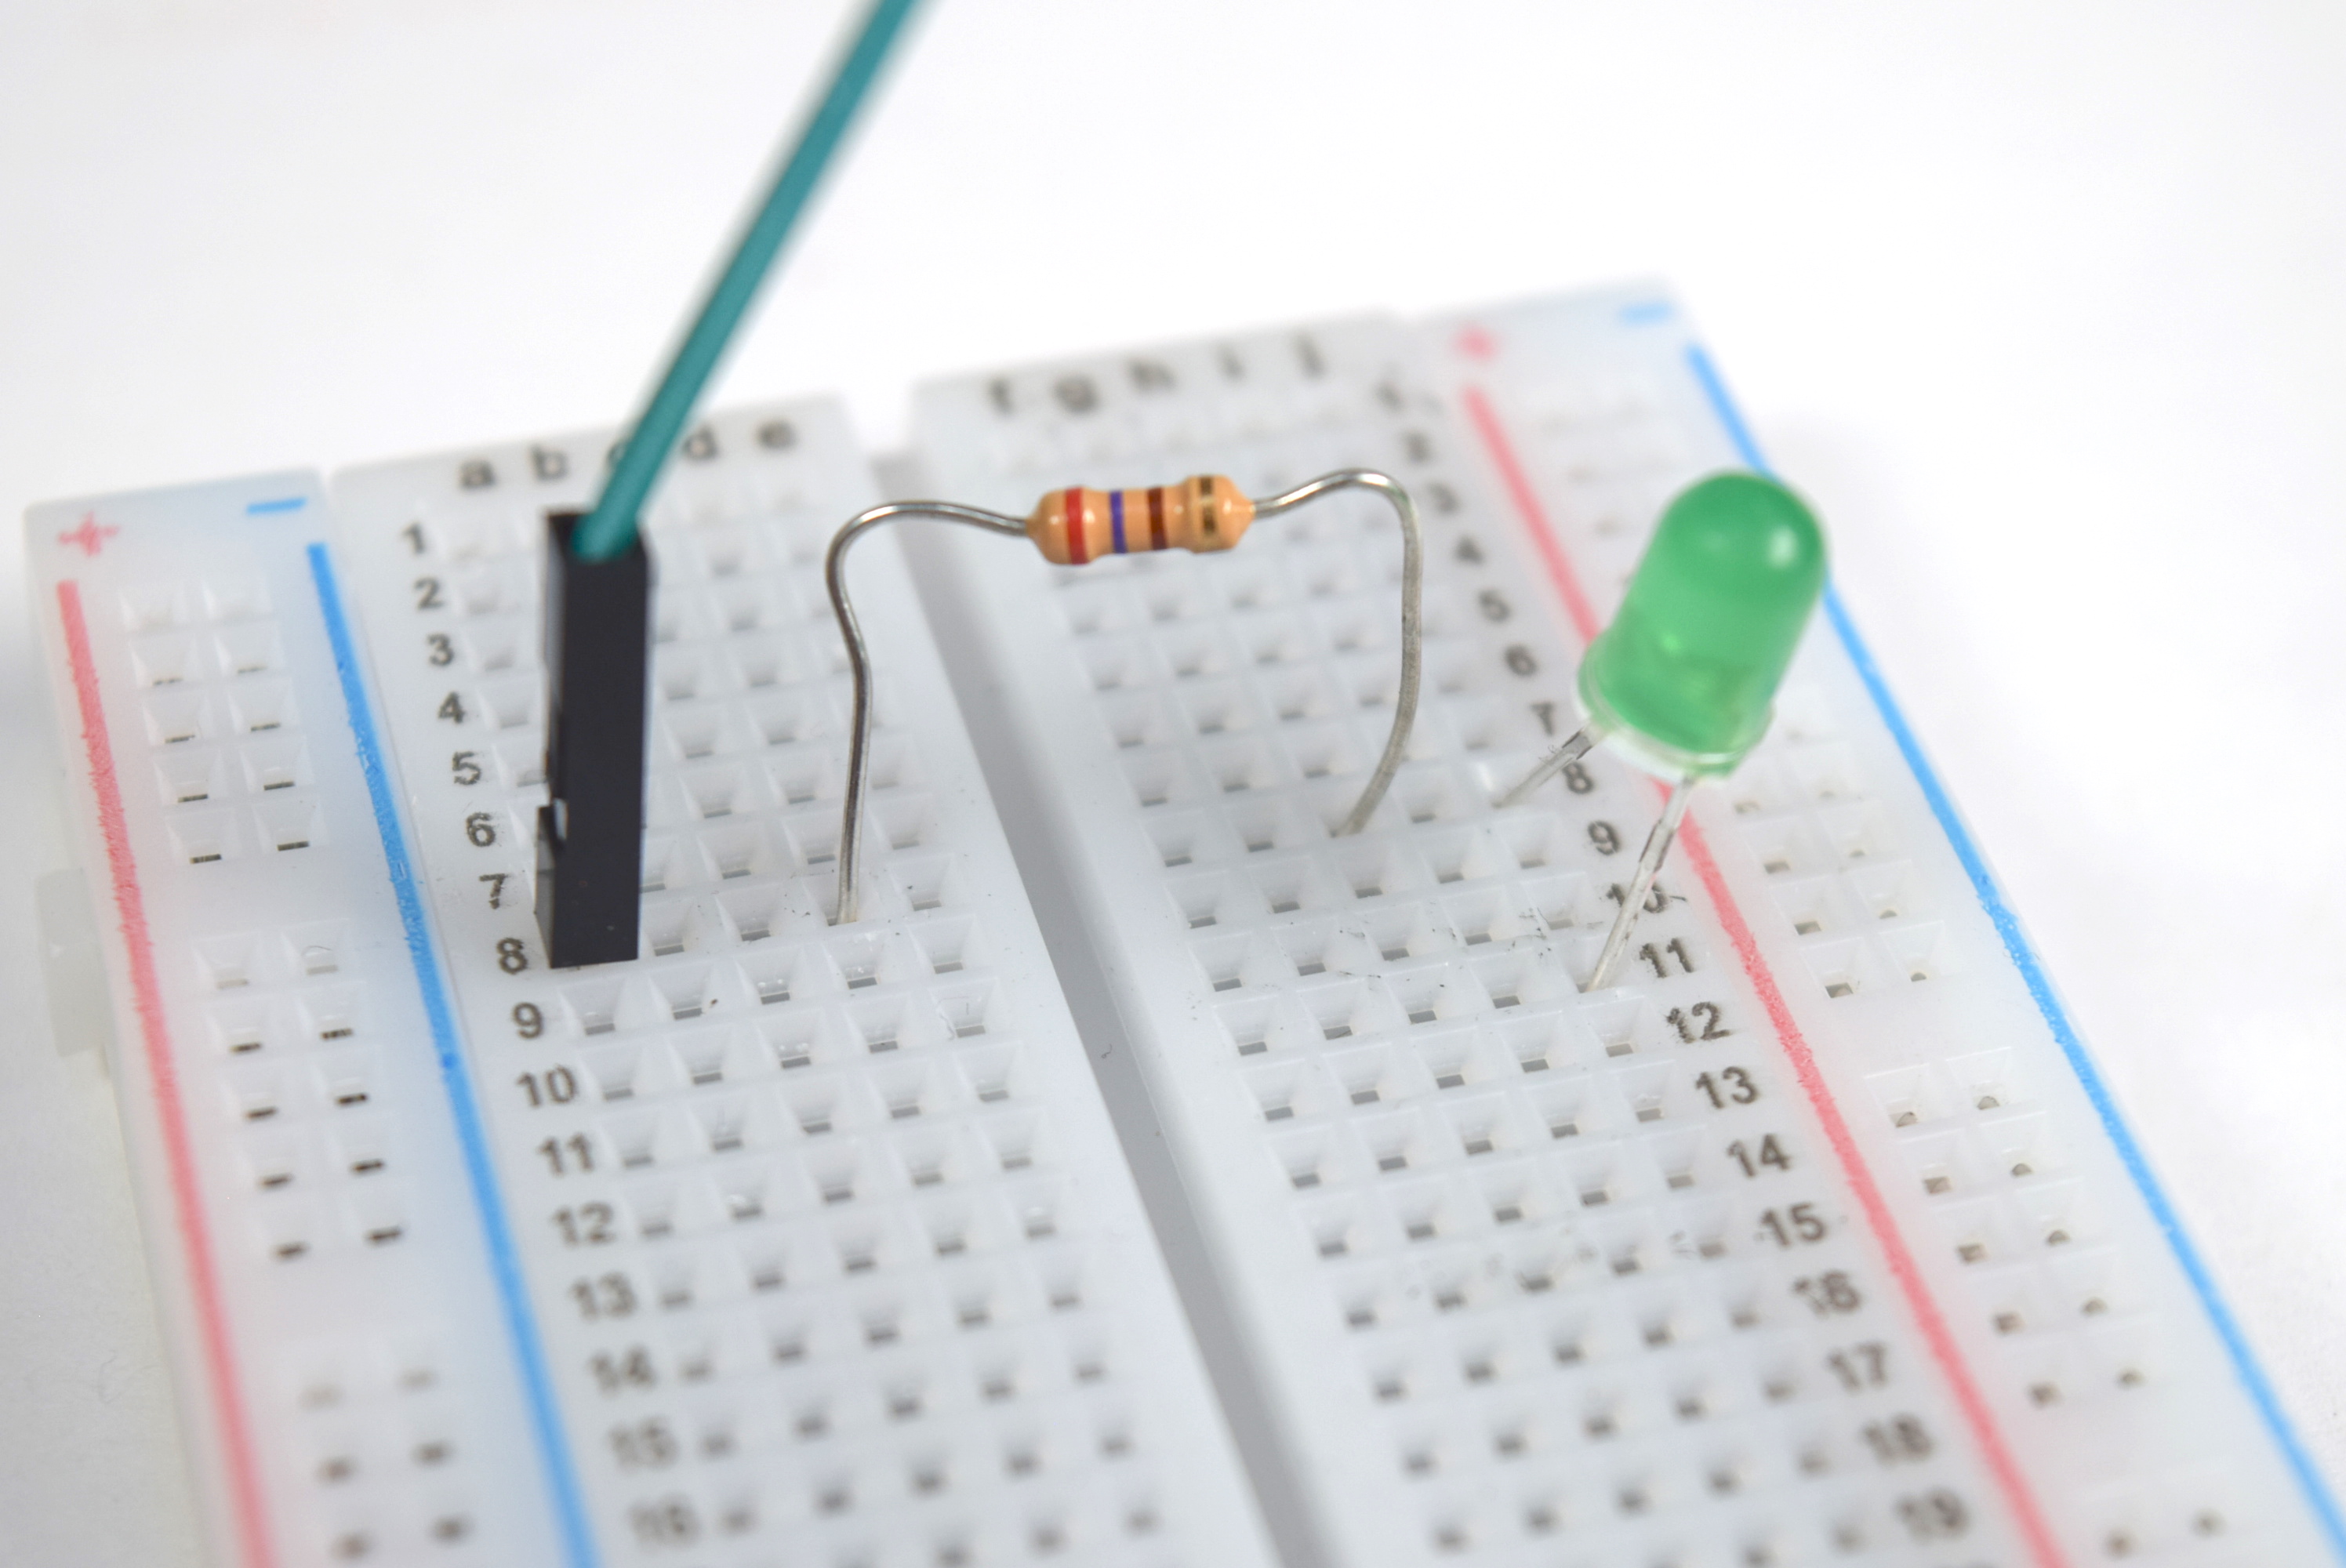 Photograph of a resistor's short leg connecting to an LED's long leg in the same row.